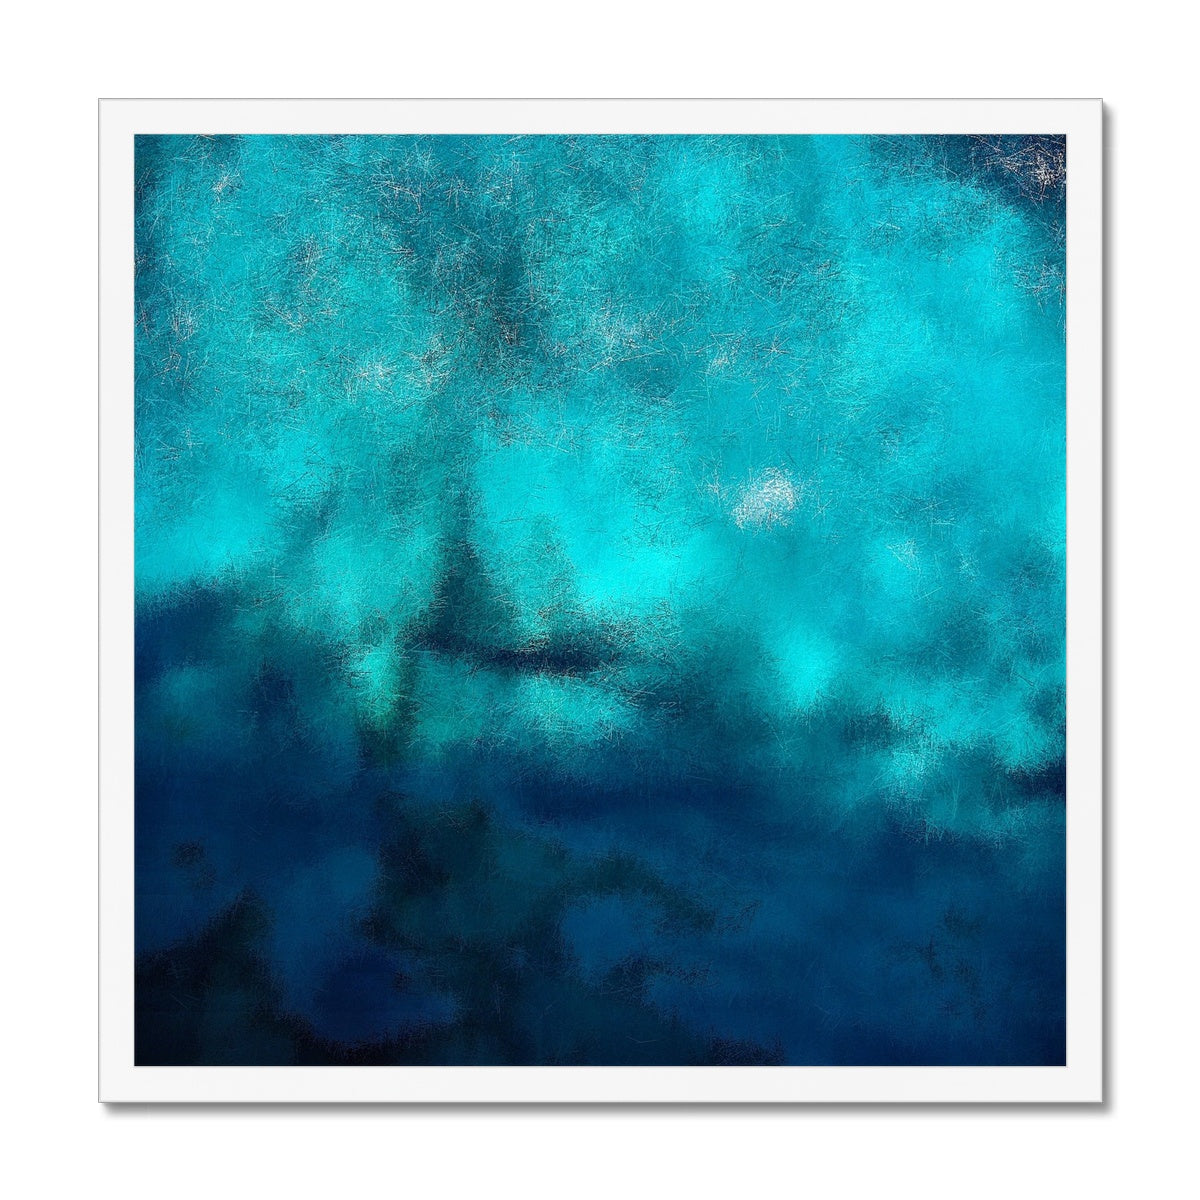 Diving Off Kos Greece Painting | Framed Prints From Scotland-Framed Prints-World Art Gallery-20"x20"-White Frame-Paintings, Prints, Homeware, Art Gifts From Scotland By Scottish Artist Kevin Hunter